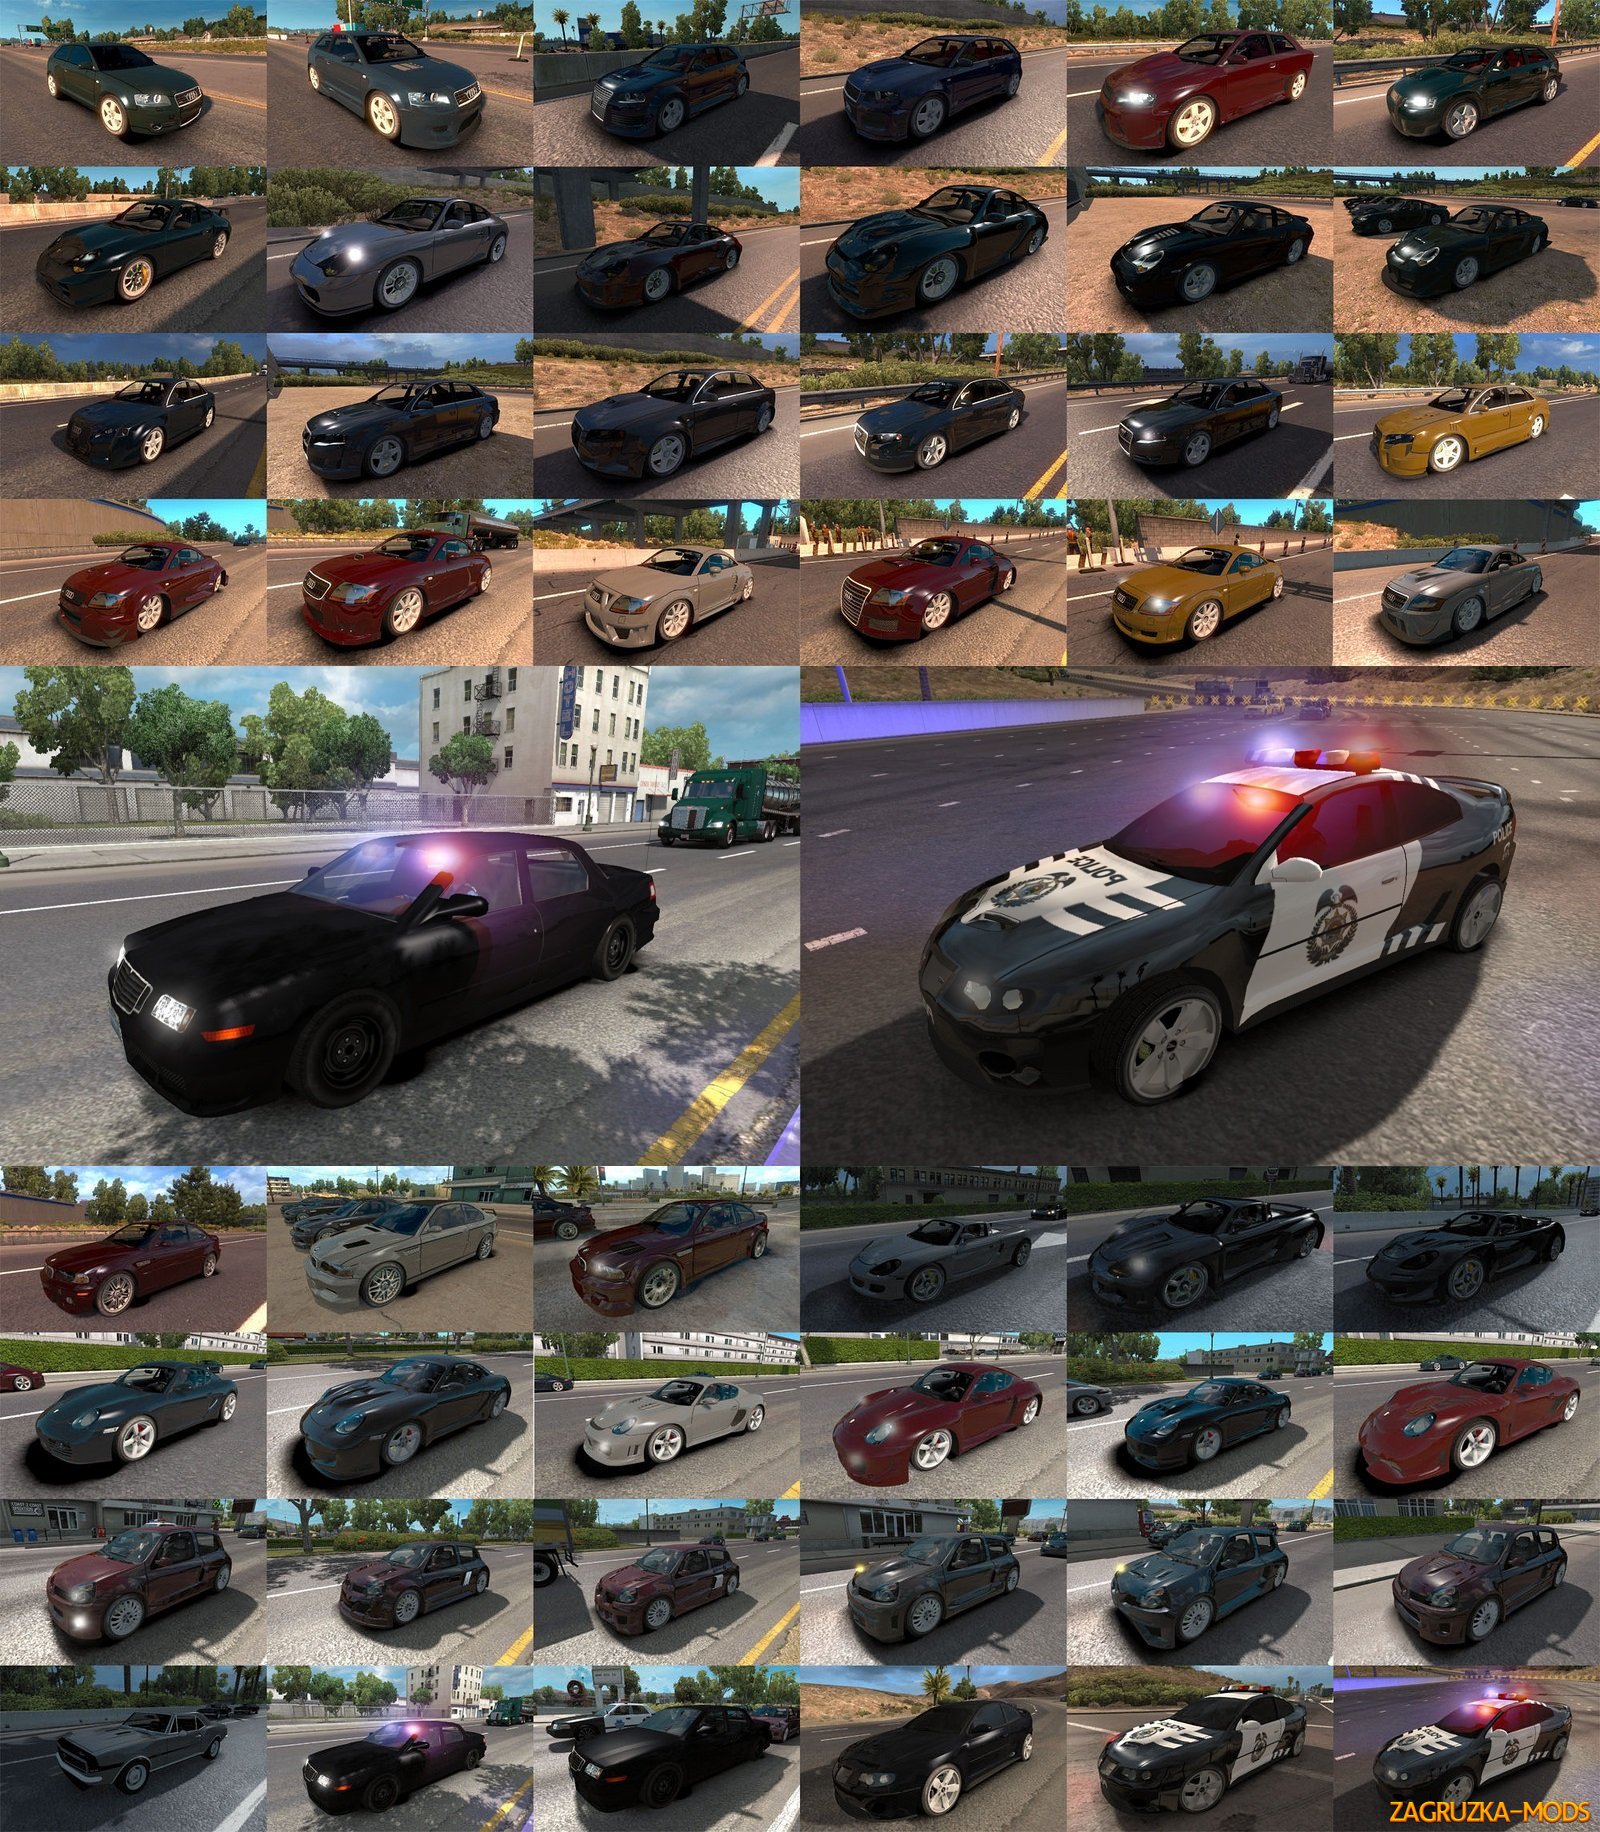 NFS: Most Wanted traffic pack (Final version)